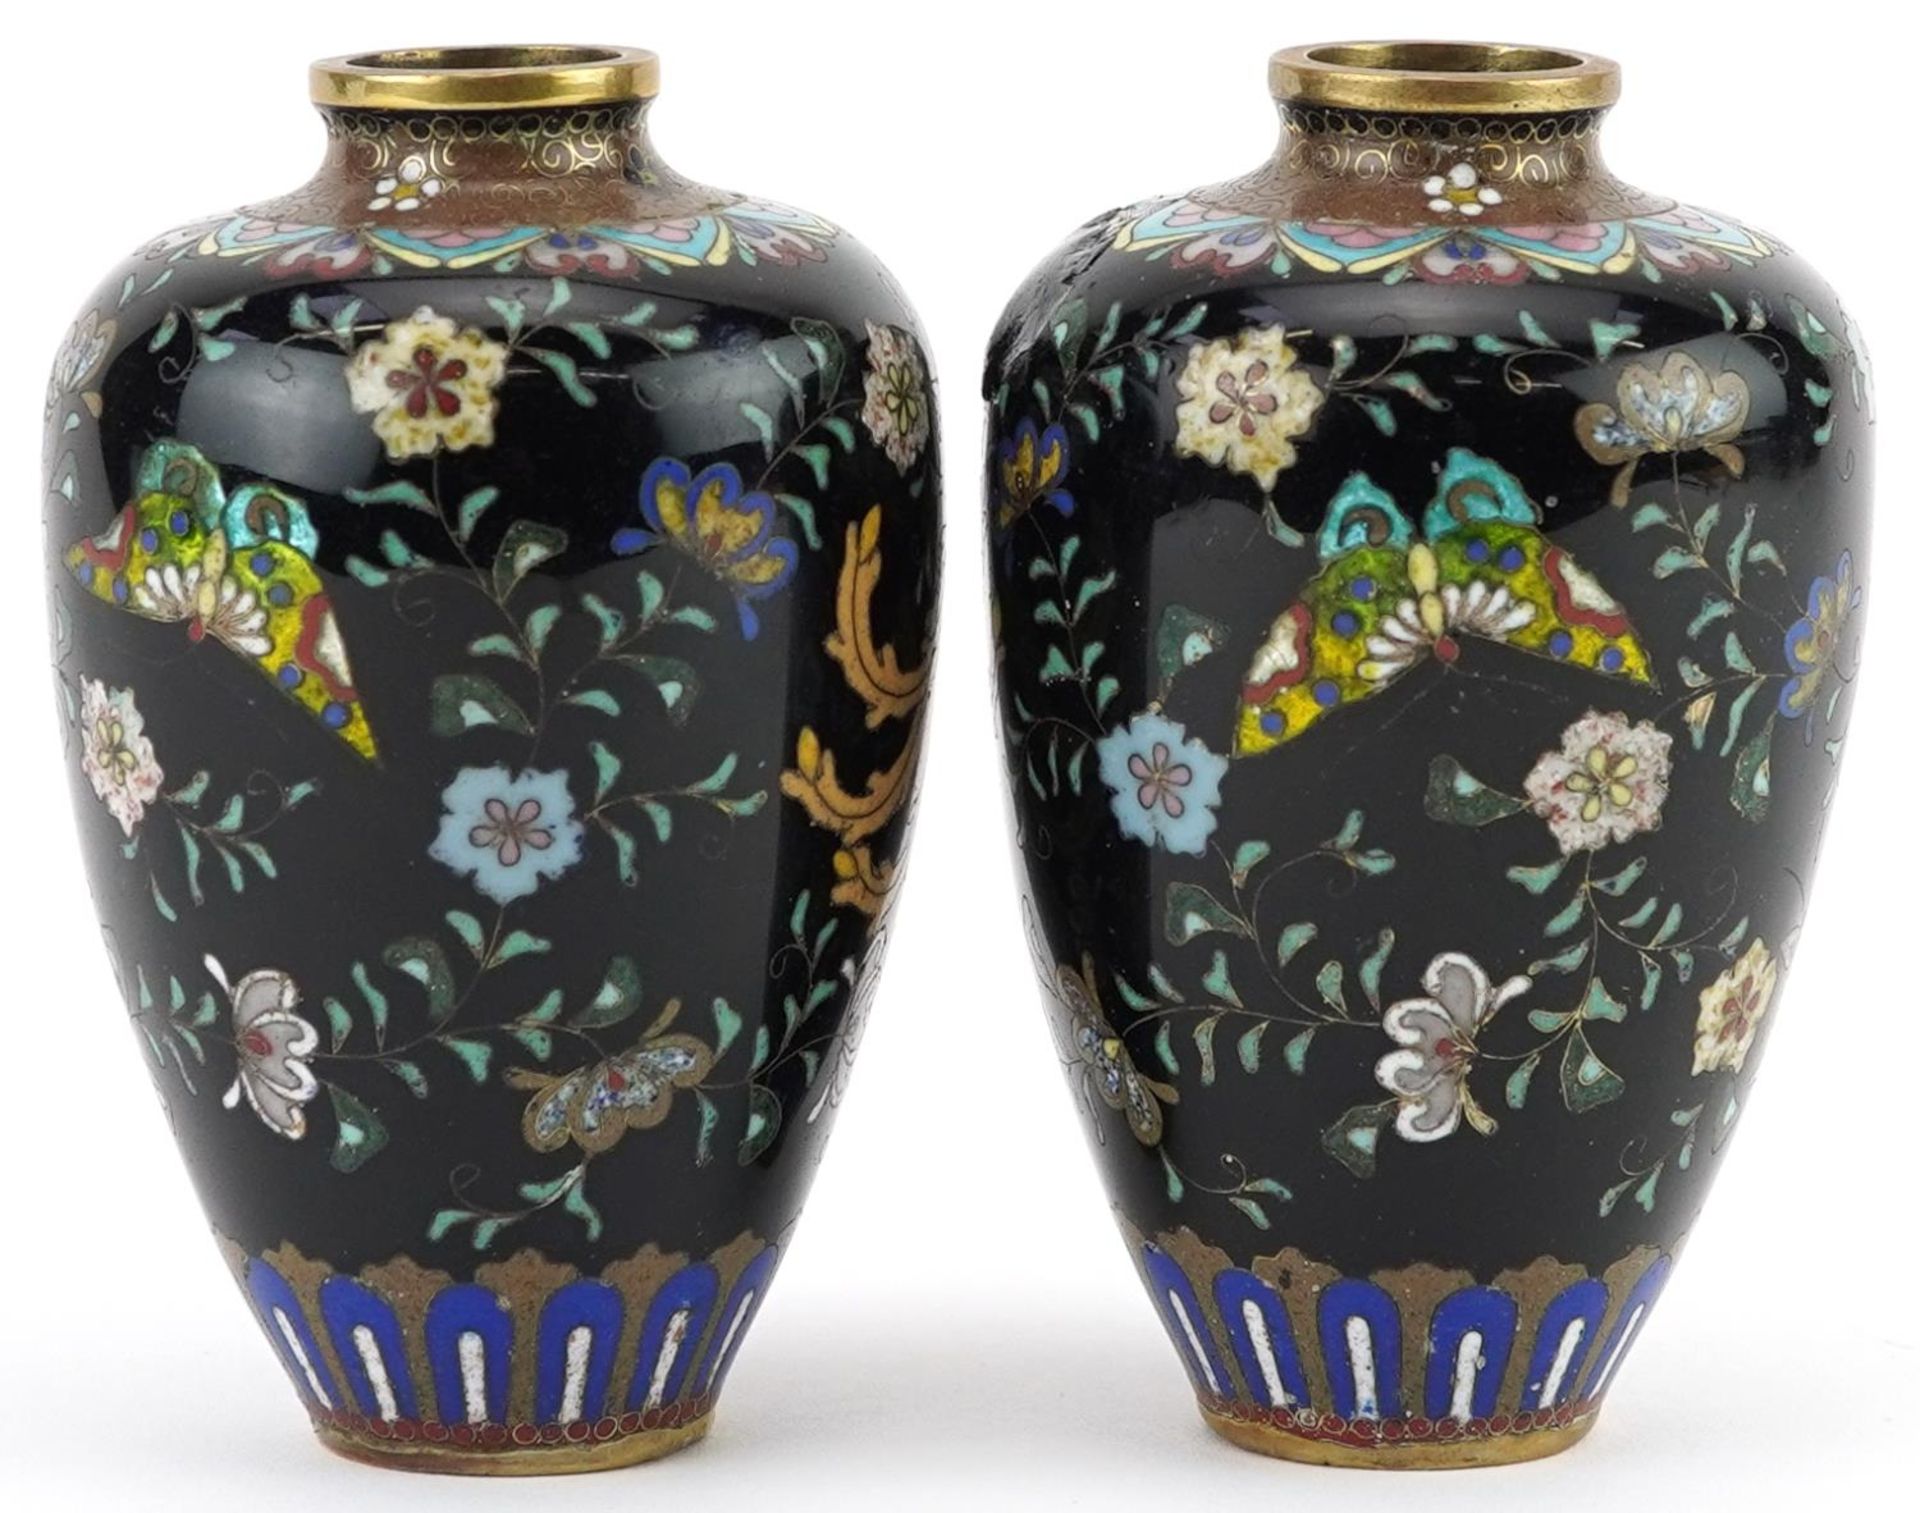 Pair of Japanese cloisonne vases, each enamelled with a mythical bird amongst flowers, each 9cm high - Image 3 of 6